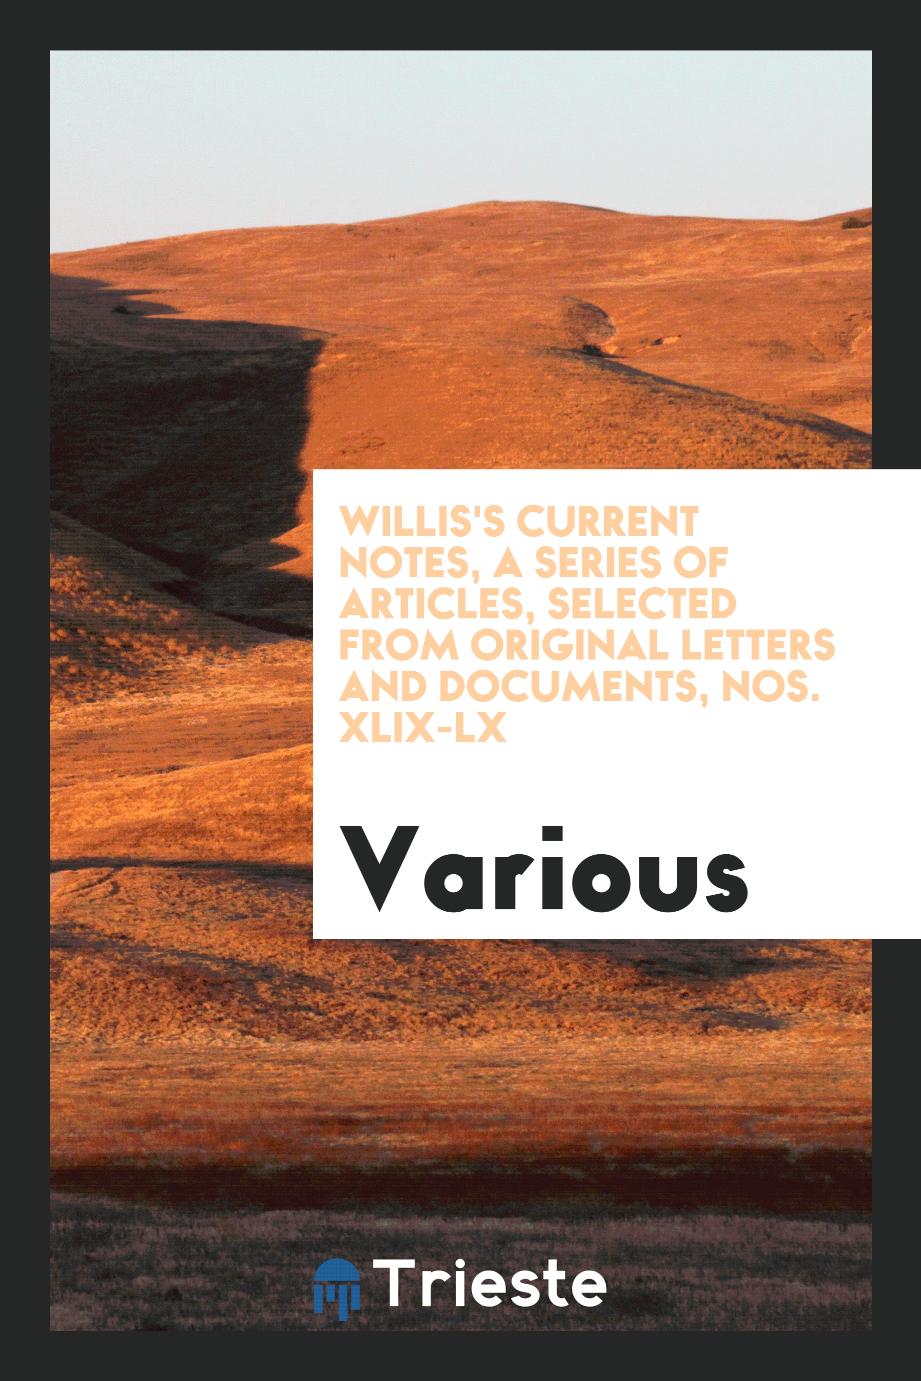 Willis's Current Notes, a Series of Articles, Selected from Original Letters and Documents, Nos. XLIX-LX